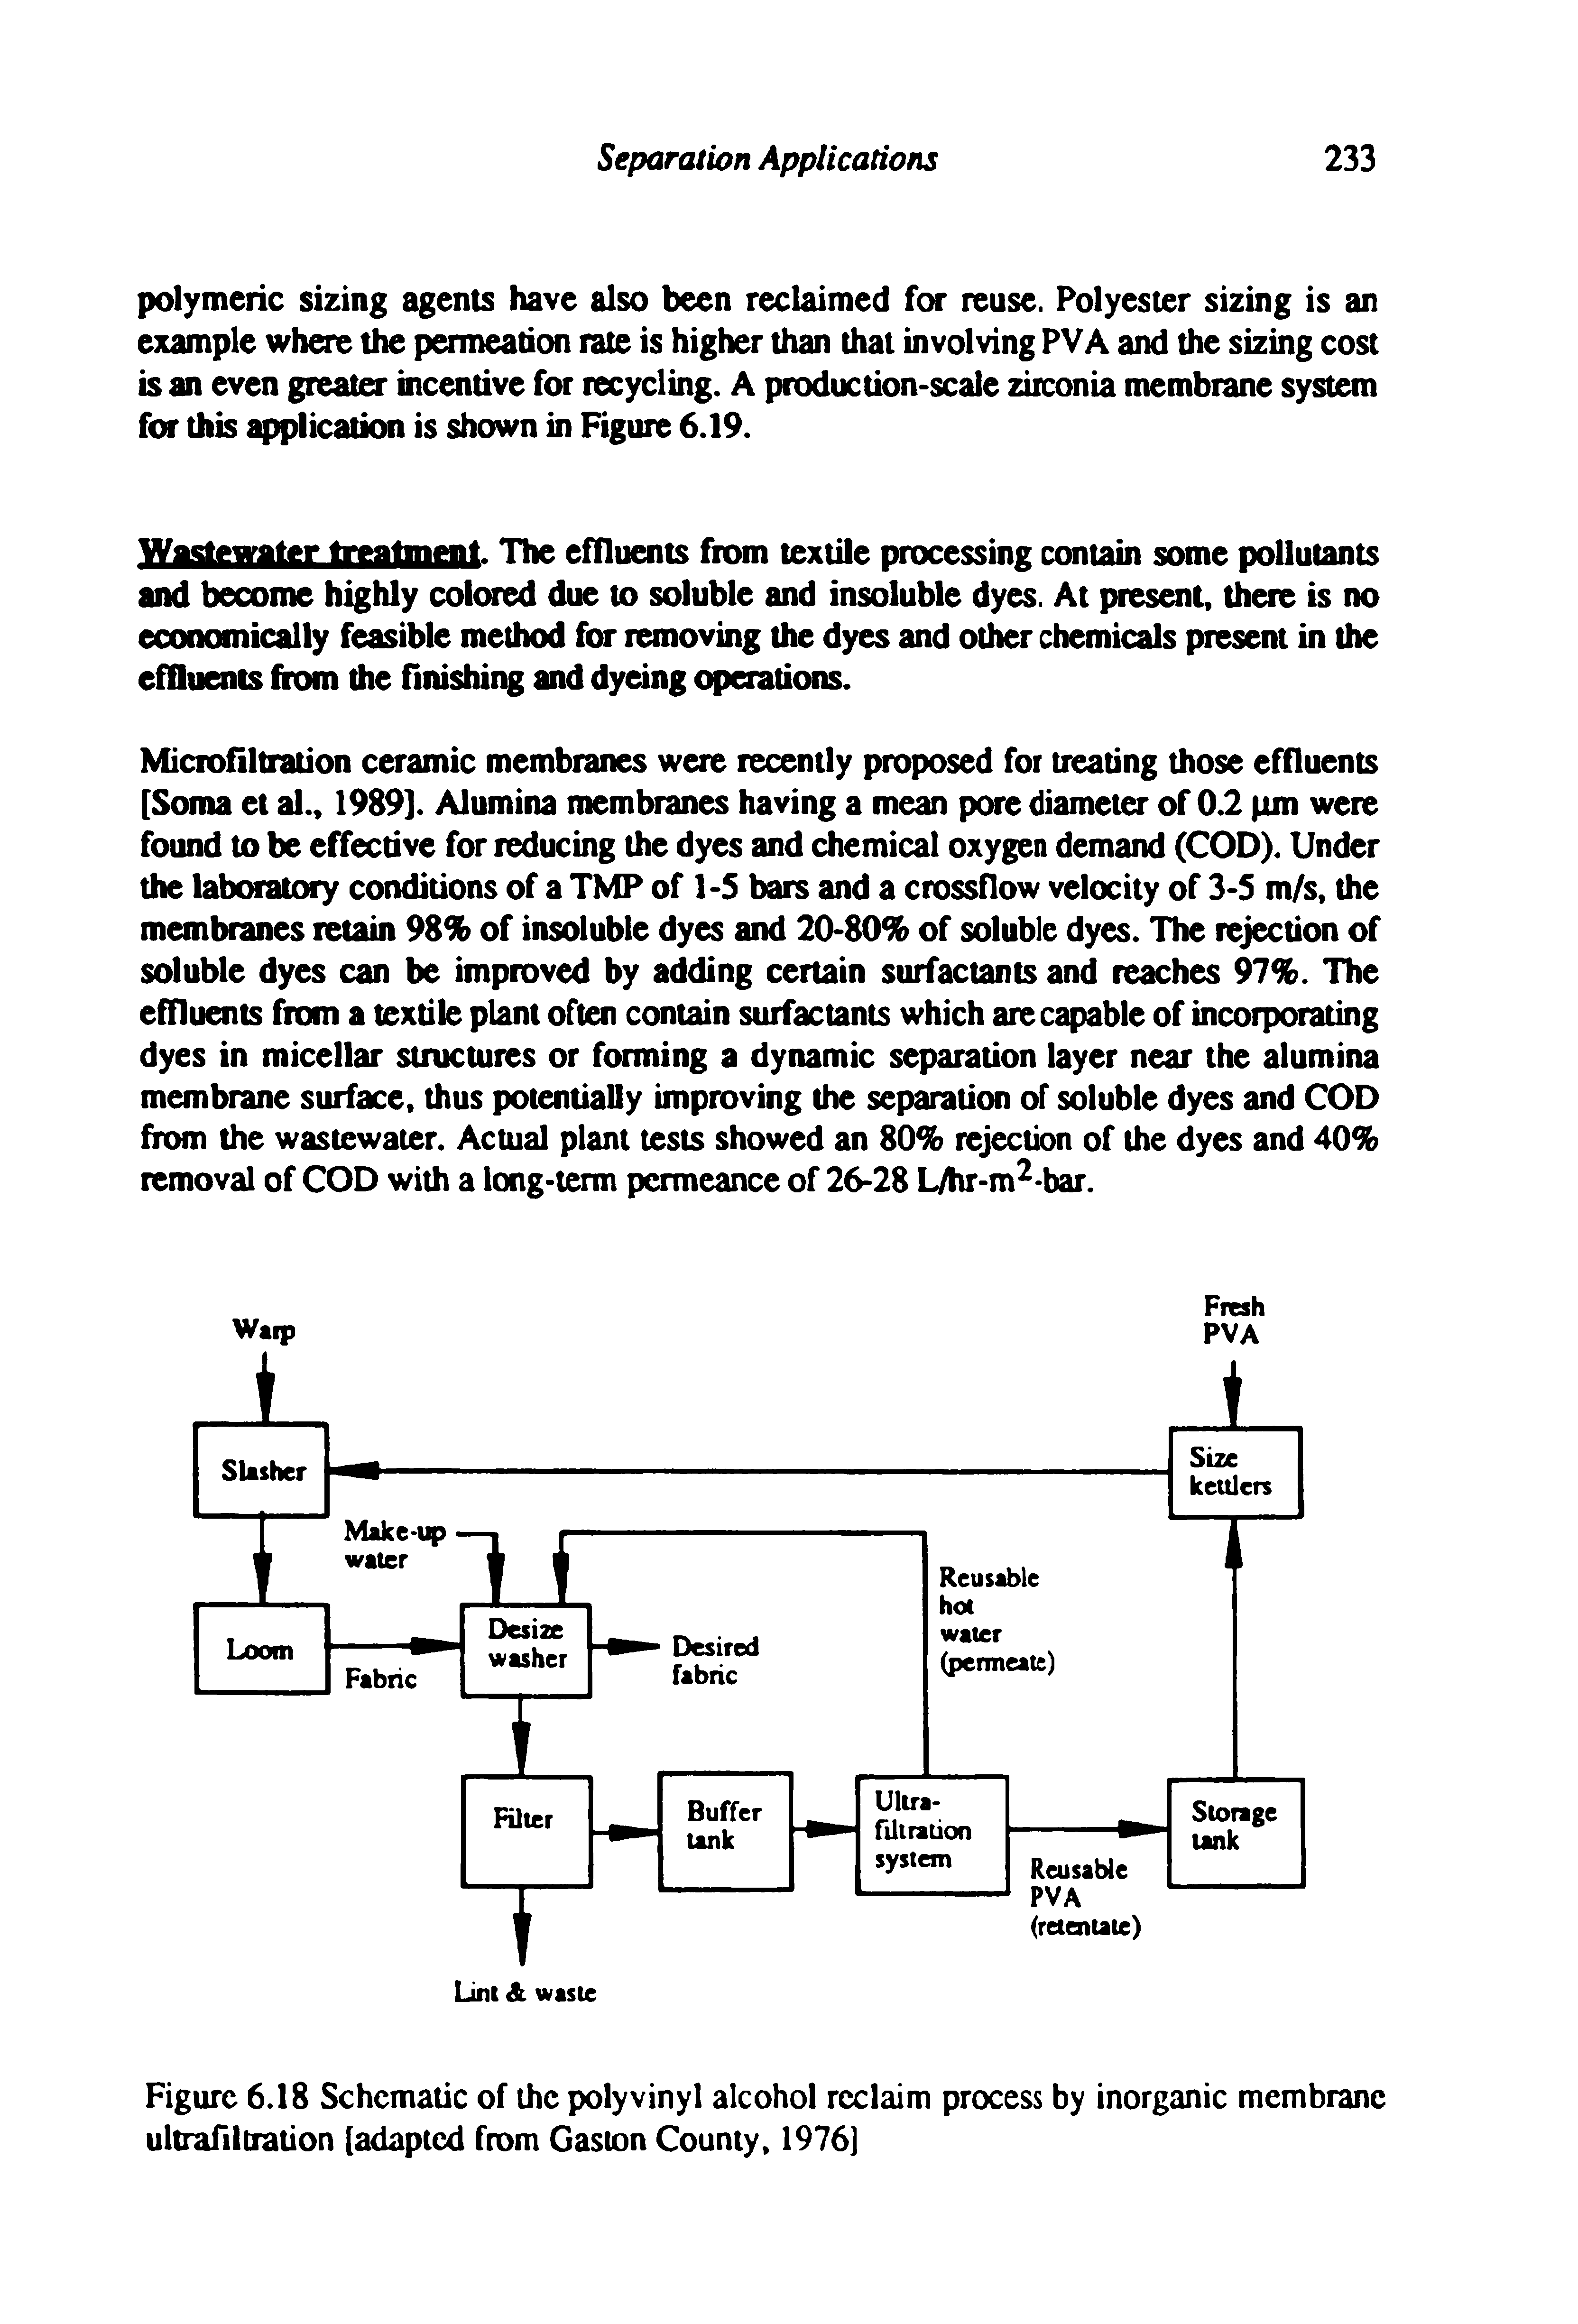 Figure 6.18 Schematic of the polyvinyl alcohol reclaim process by inorganic membrane ultrafiltration [adapted from Gaston County, 1976J...